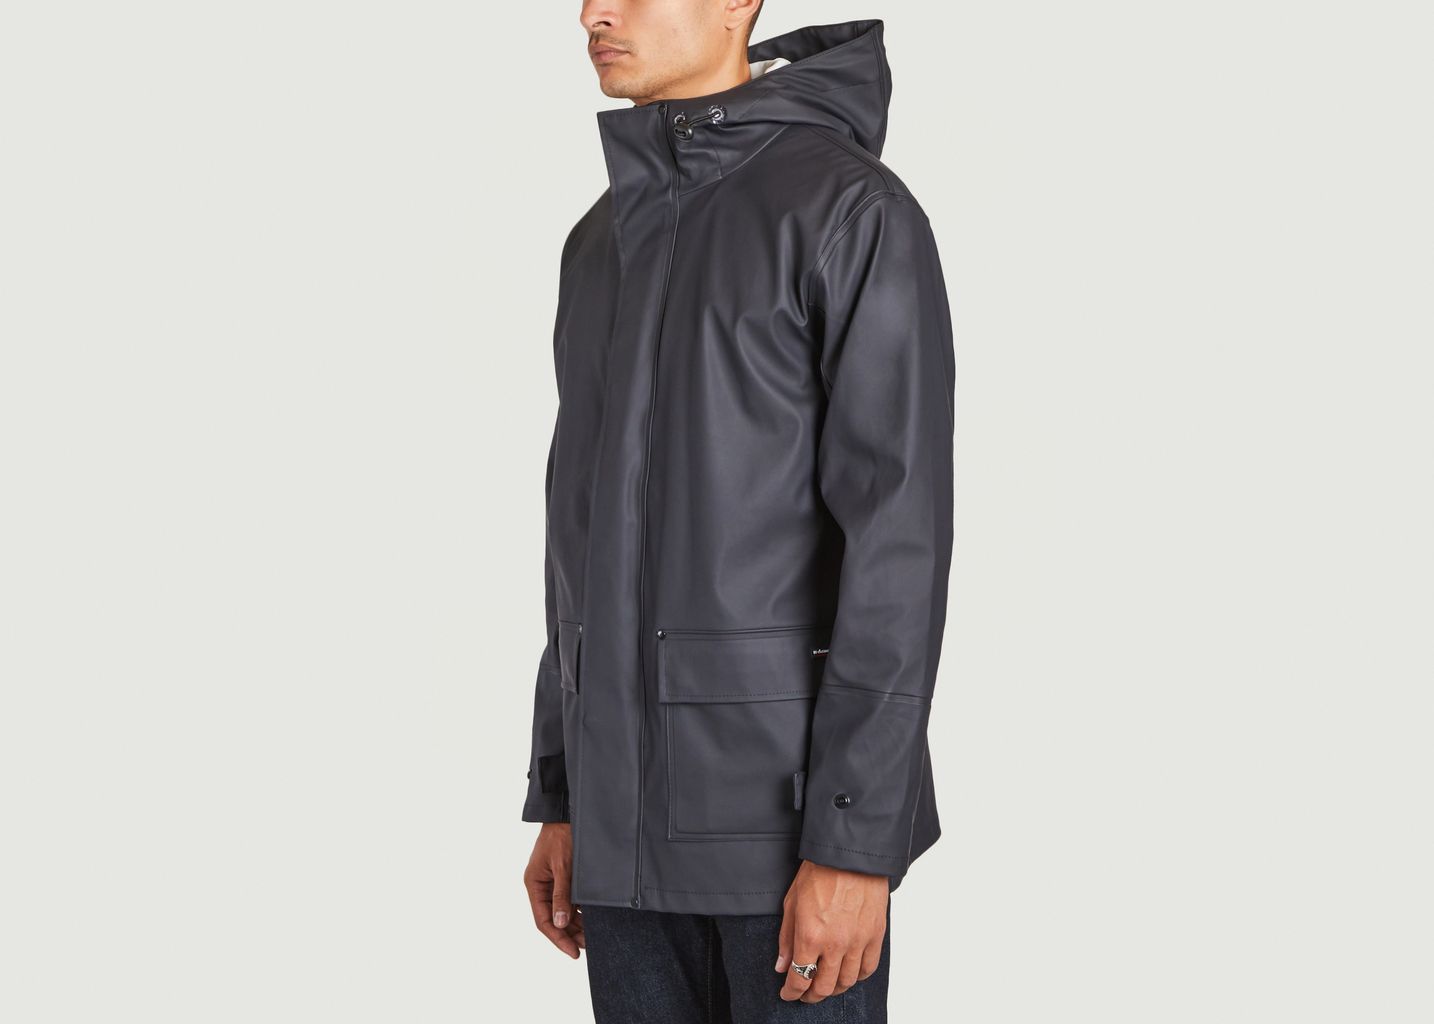 Penmarch straight cut greaseproof jacket - Armor Lux